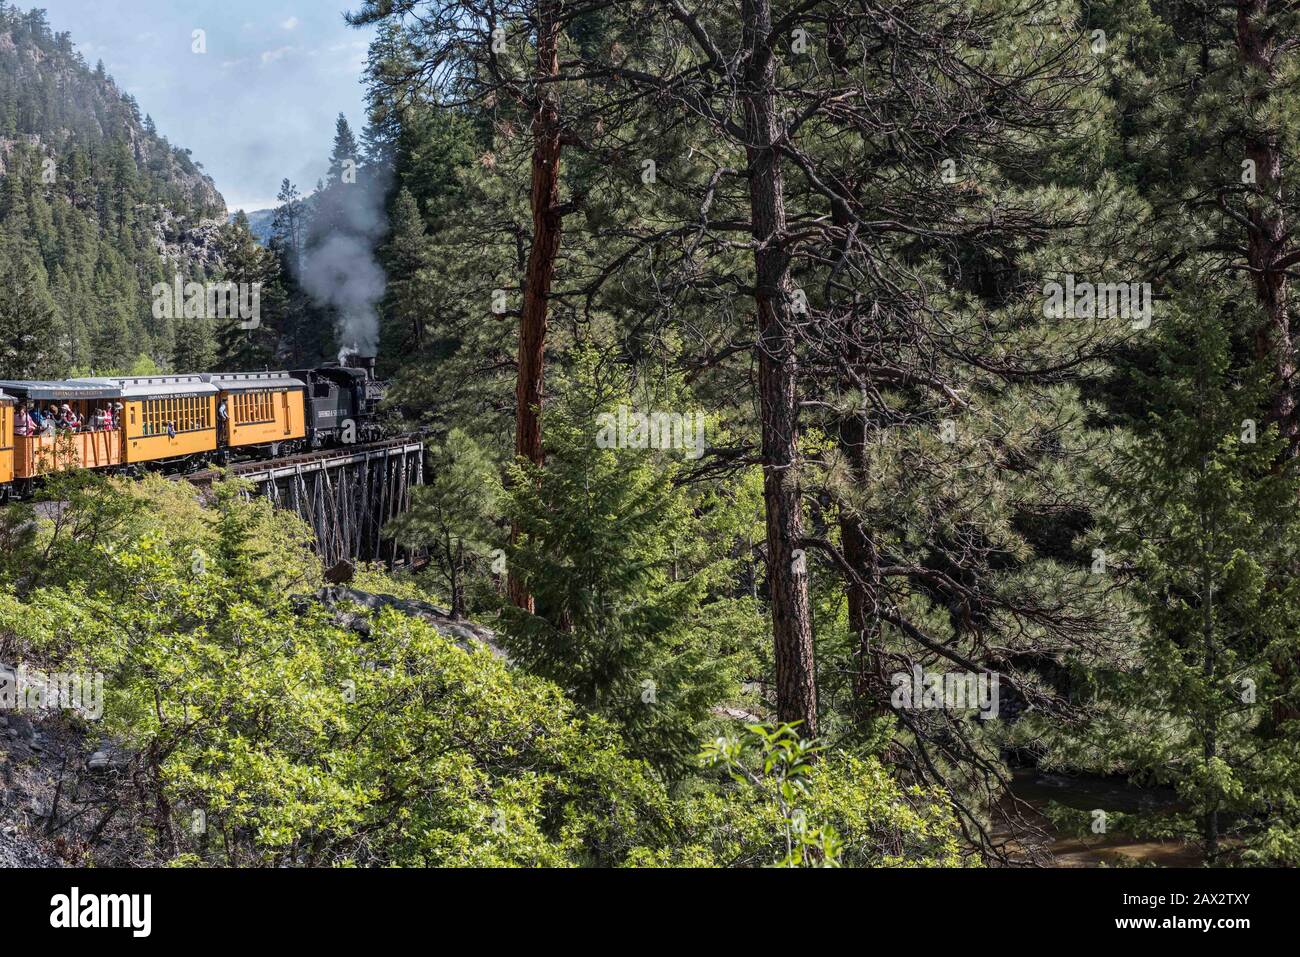 English: Title: A  Durango & Silverton Narrow Gauge Railroad (D&SNG) train proceeds along the rocky Highline ridge high above the Animas River Valley in La Plata County, Colorado Physical description: 1 photograph : digital, tiff file, color.  Notes: The D&SNG is a narrow-gauge railroad that operates 45.2 miles of track between Durango and Silverton in southwest Colorado. The route was originally opened in 1882 by the Denver & Rio Grande Railway to transport silver and gold ore mined from the San Juan Mountains. The line has run continuously since 1881, and some rolling stock dates to then. It Stock Photo